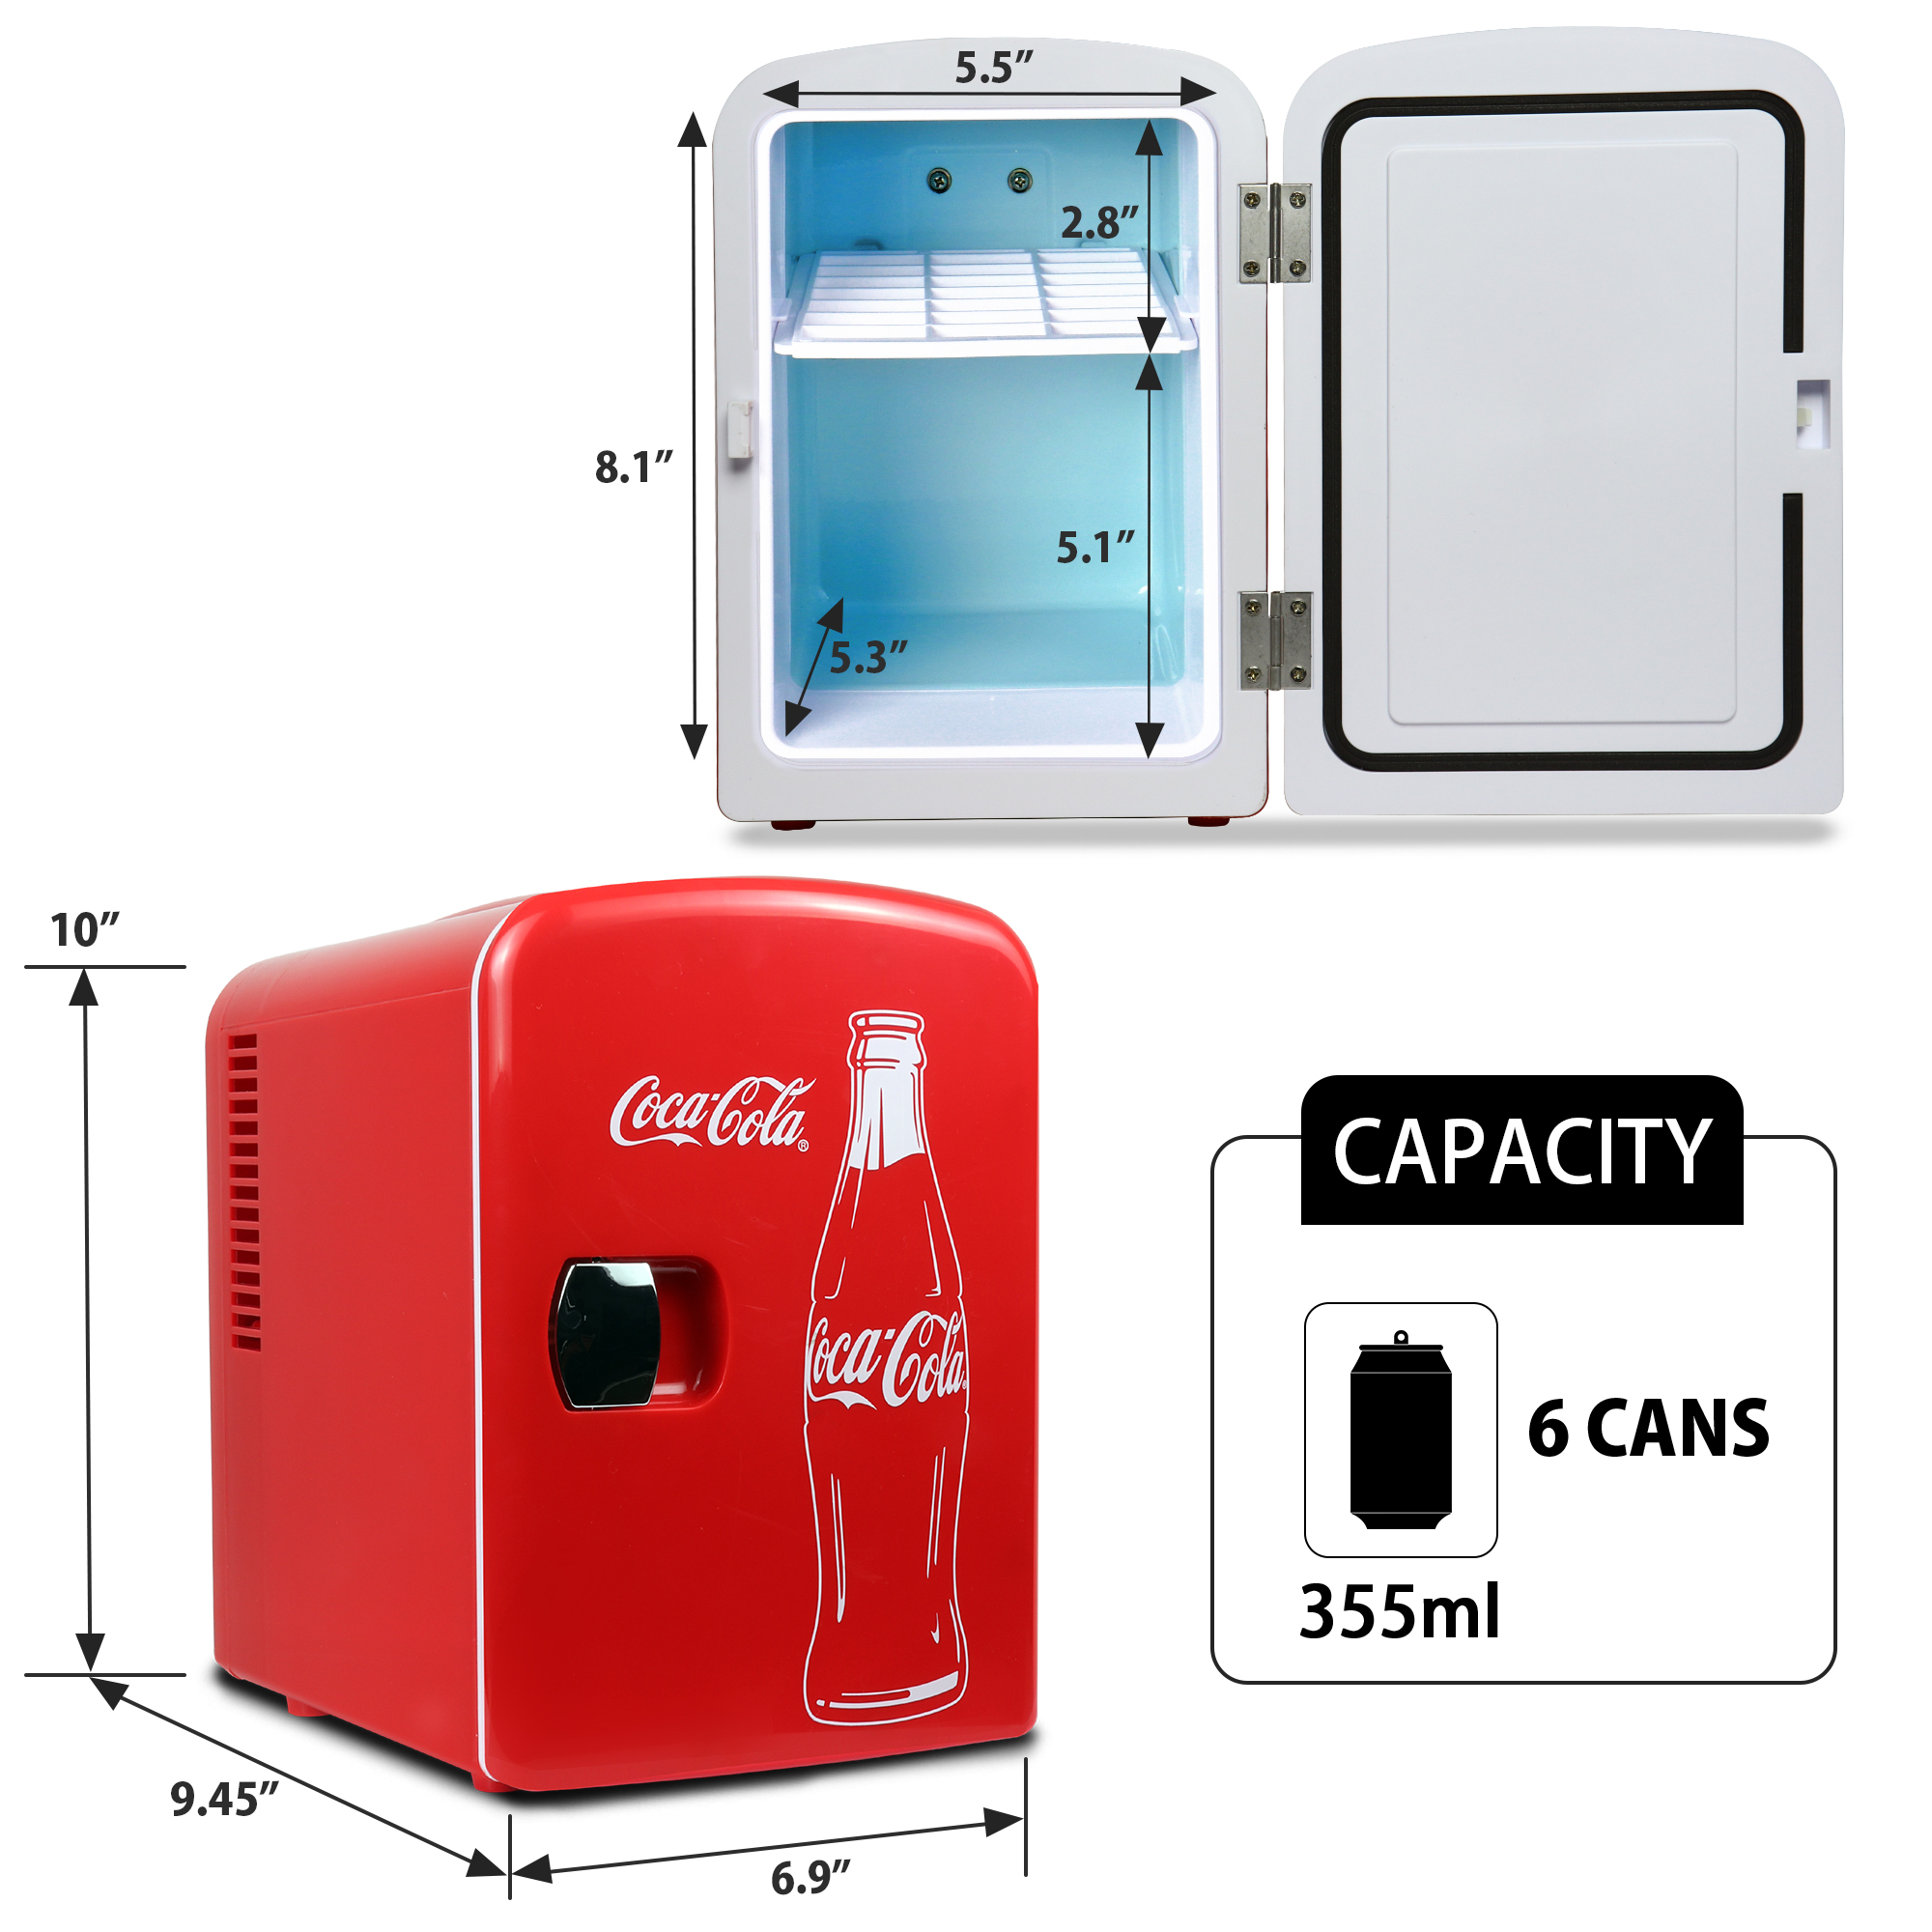 Coca-Cola Classic 4L Mini Fridge w/ 12V DC and 110V AC Cords, 6 Can Portable Cooler, Personal Travel Refrigerator for Snacks Lunch Drinks Cosmetics, Desk Home Office Dorm, Red - image 3 of 8